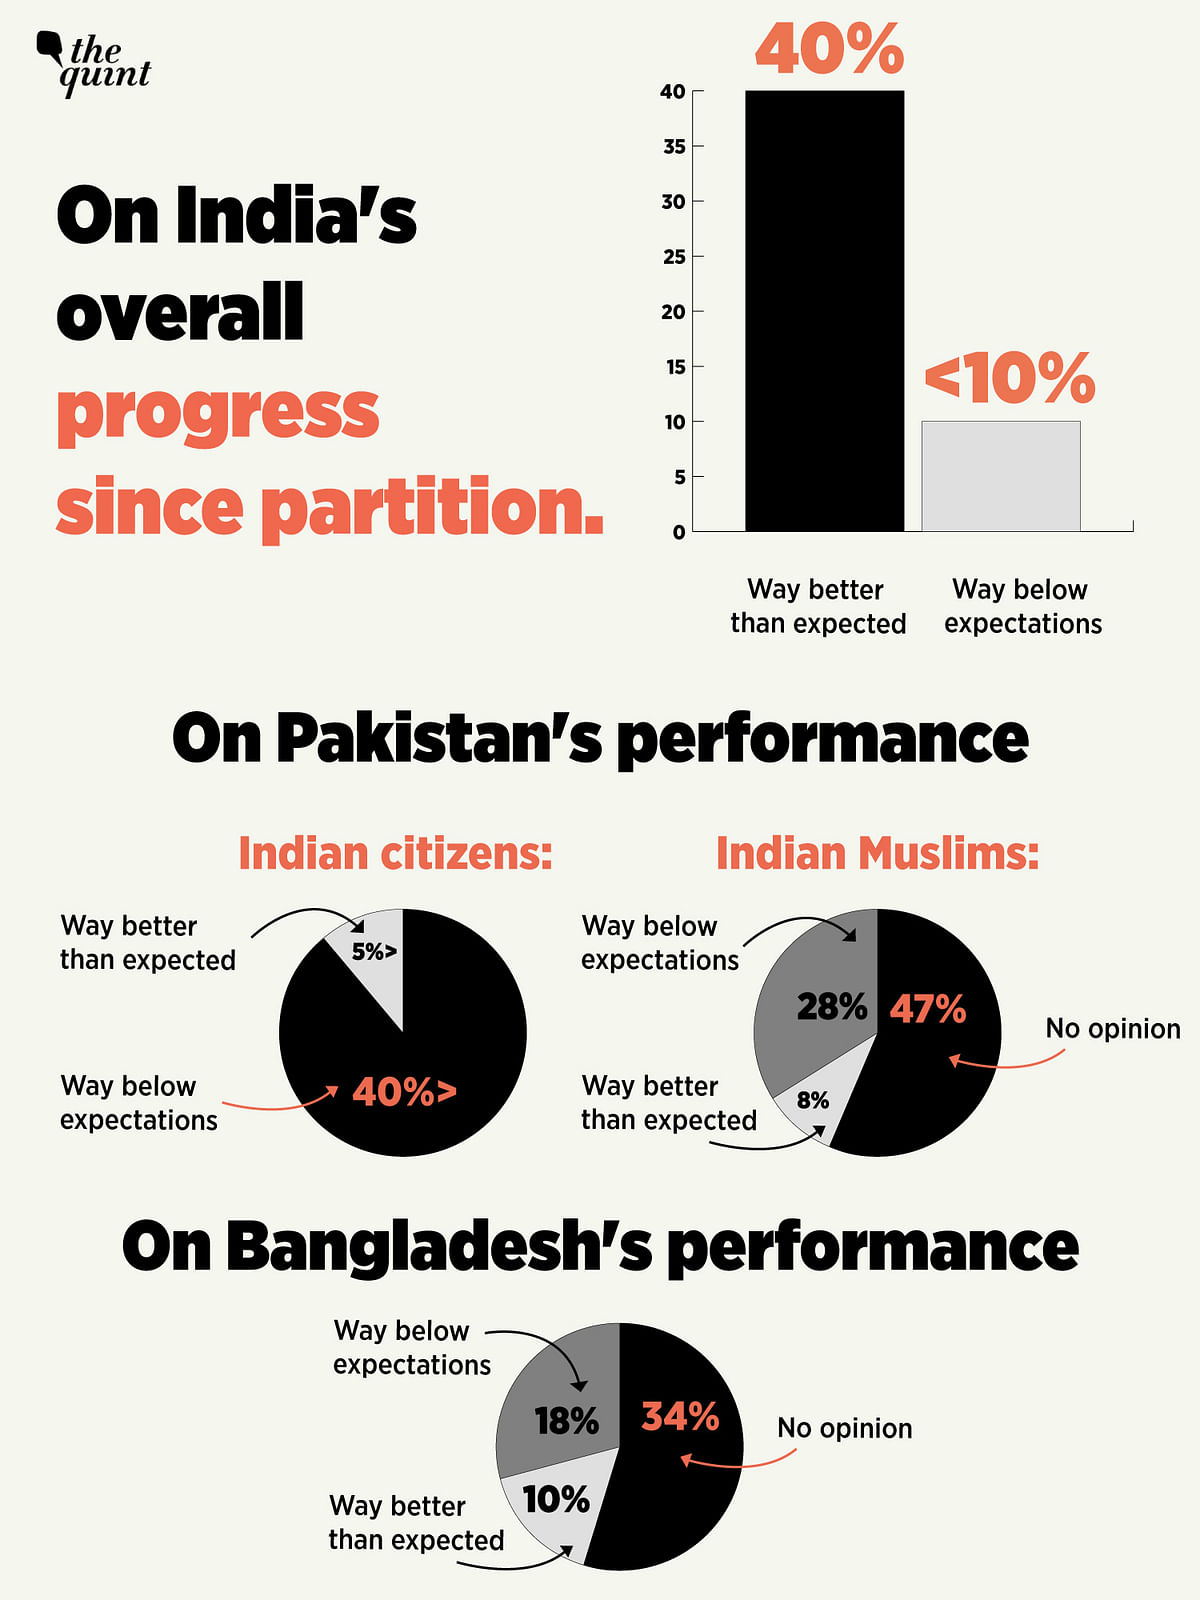 There is a yawning gap between Pakistan & Bangladesh based on the levels of trust Indians display for both nations.